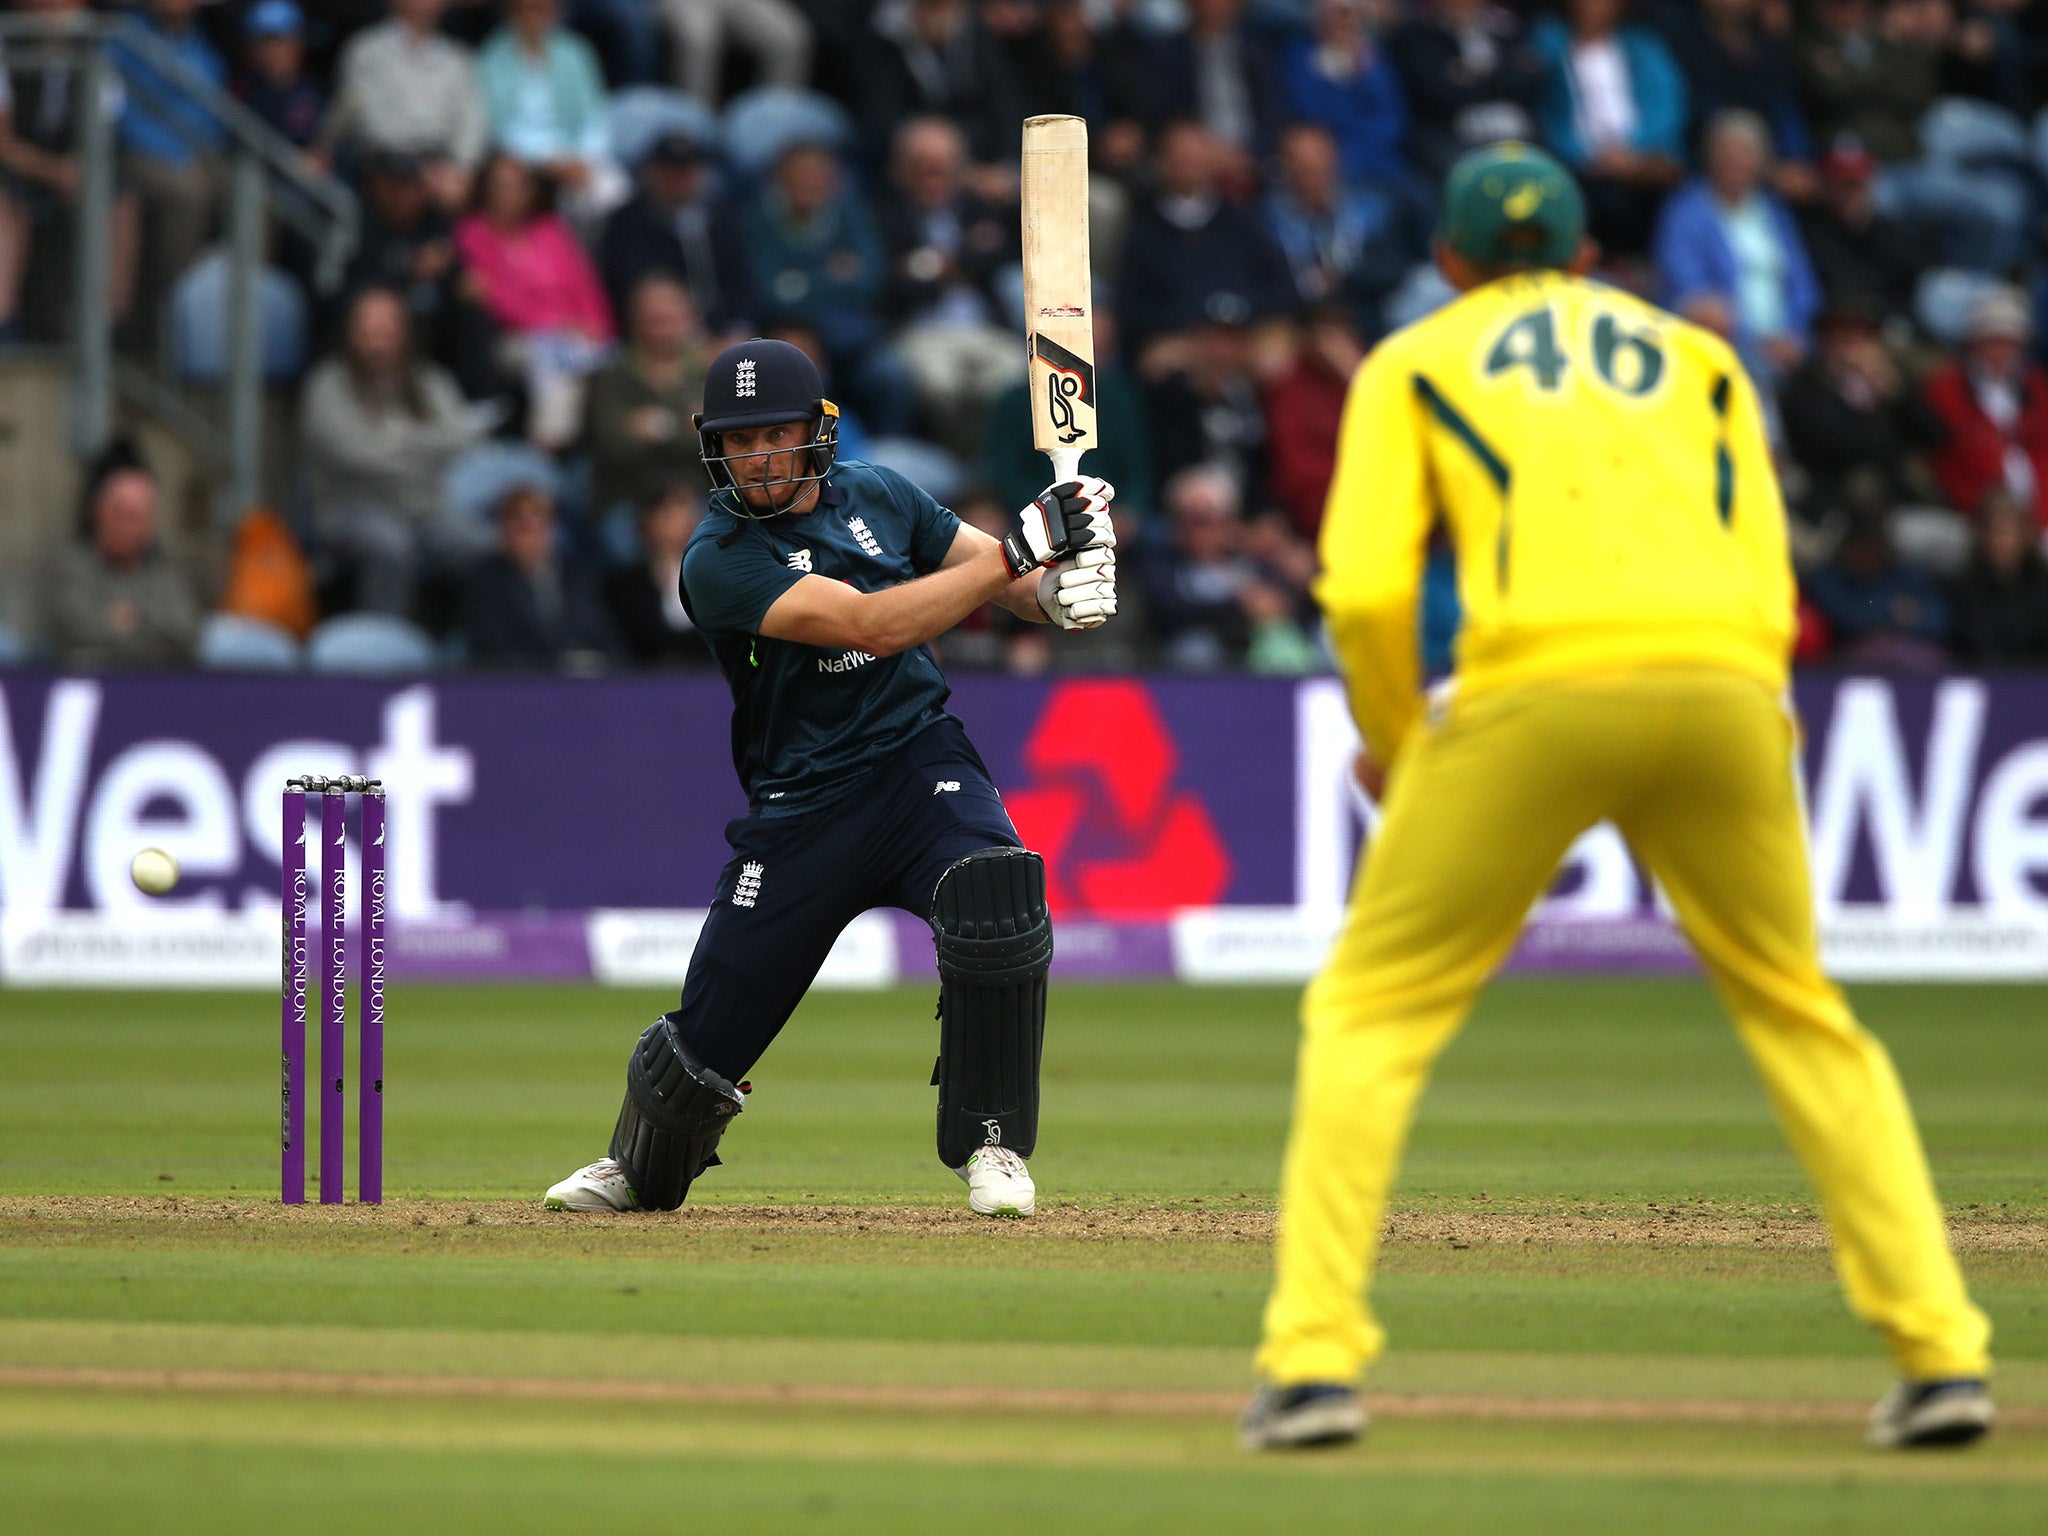 Buttler hit a match-winning century for England in the fifth ODI